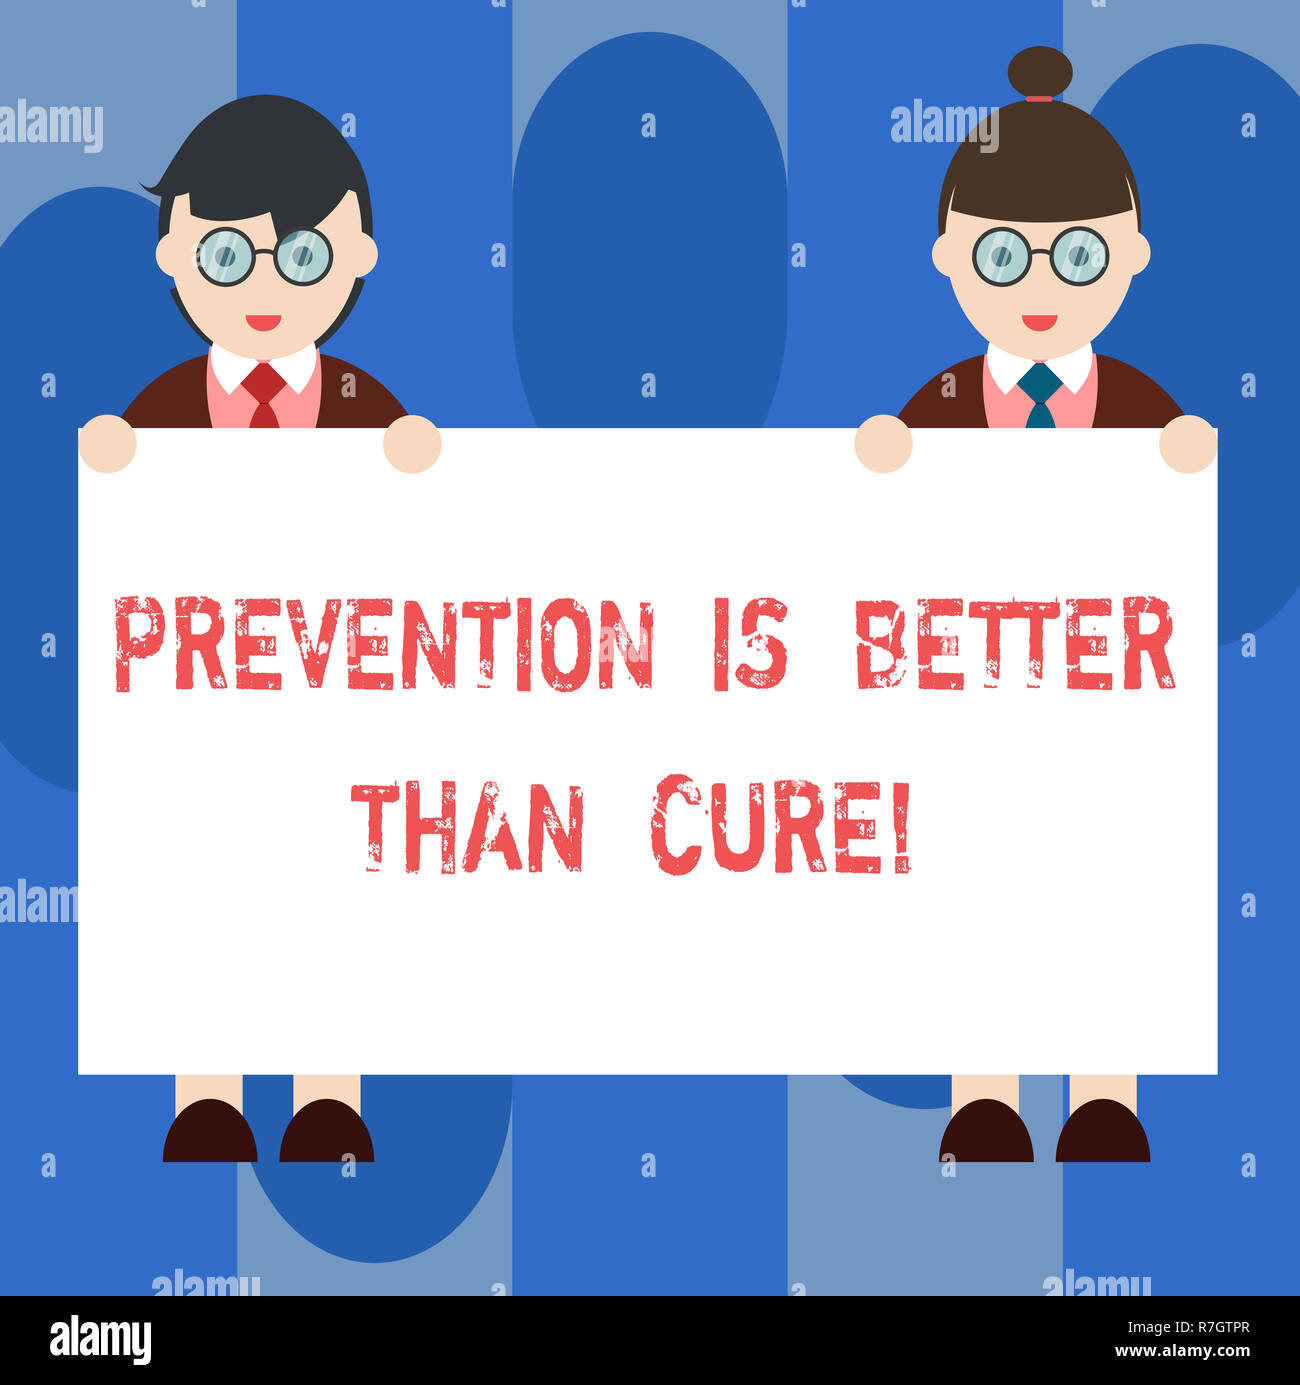 Prevention is better than cure meaning